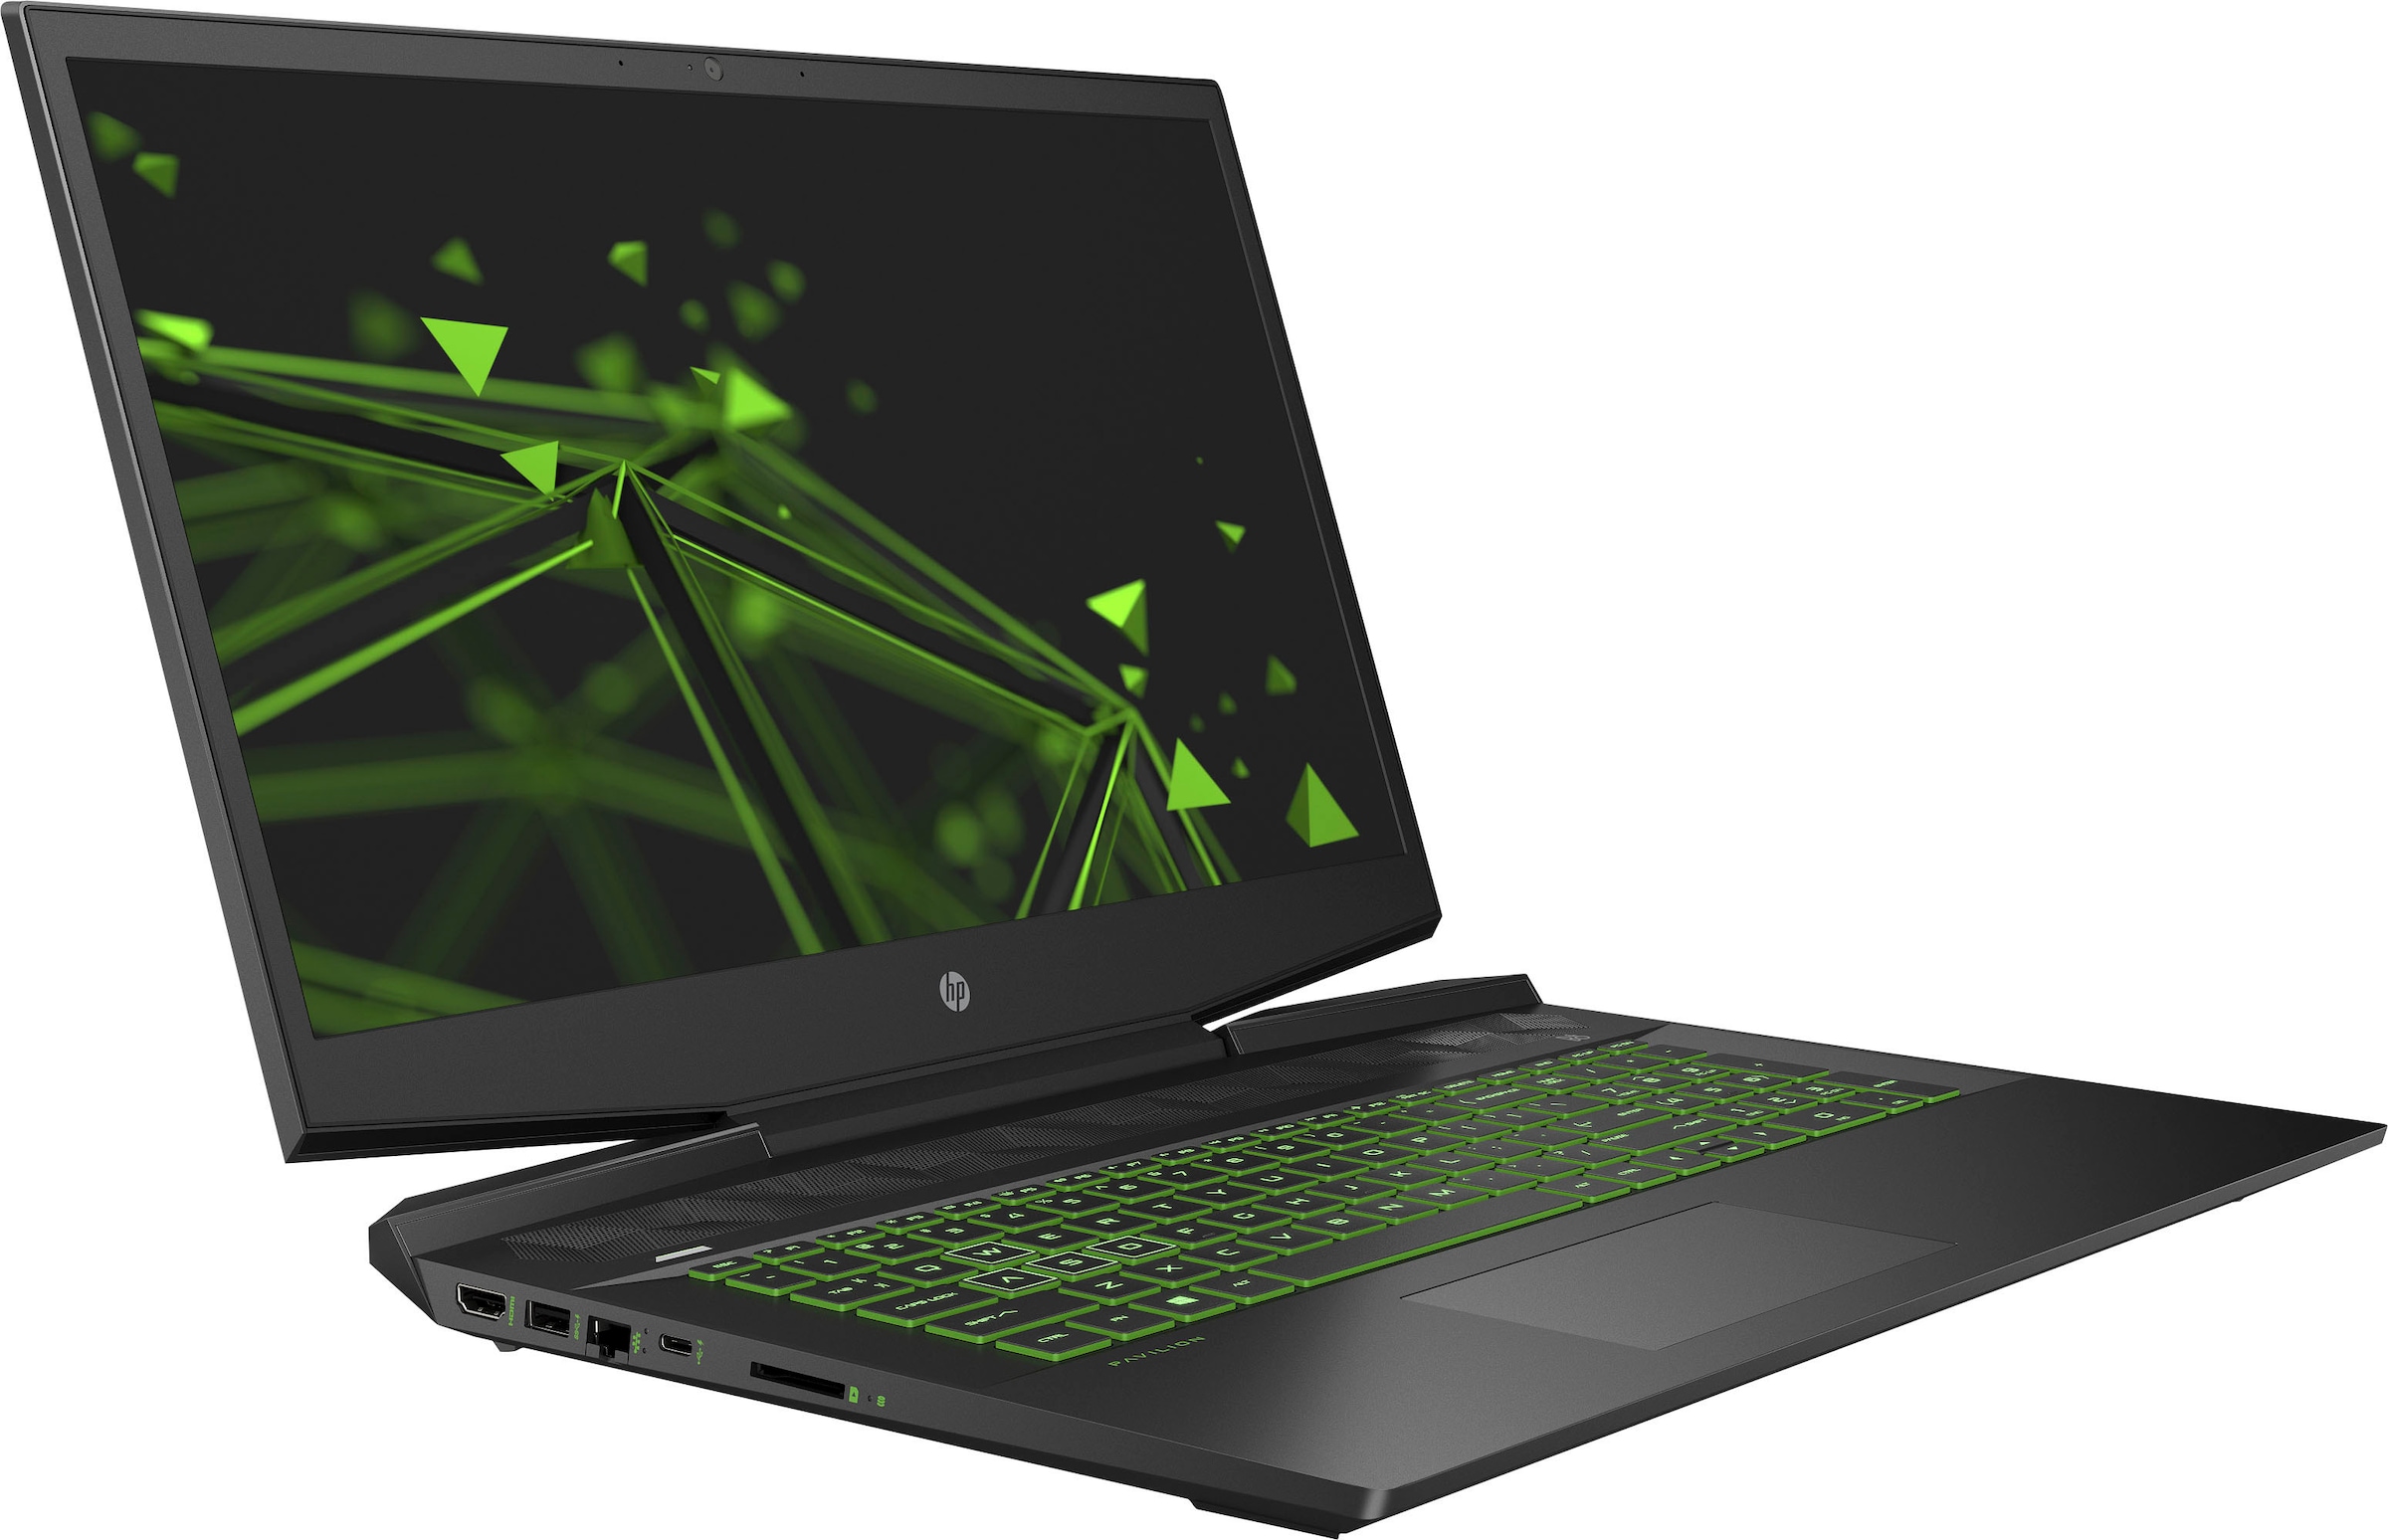 kaufen 17-cd2254ng«, HP cm, GeForce Ti, 17,3 3050 512 online »Pavilion GB Gaming-Notebook RTX Core Intel, SSD / 43,9 Zoll, i5,